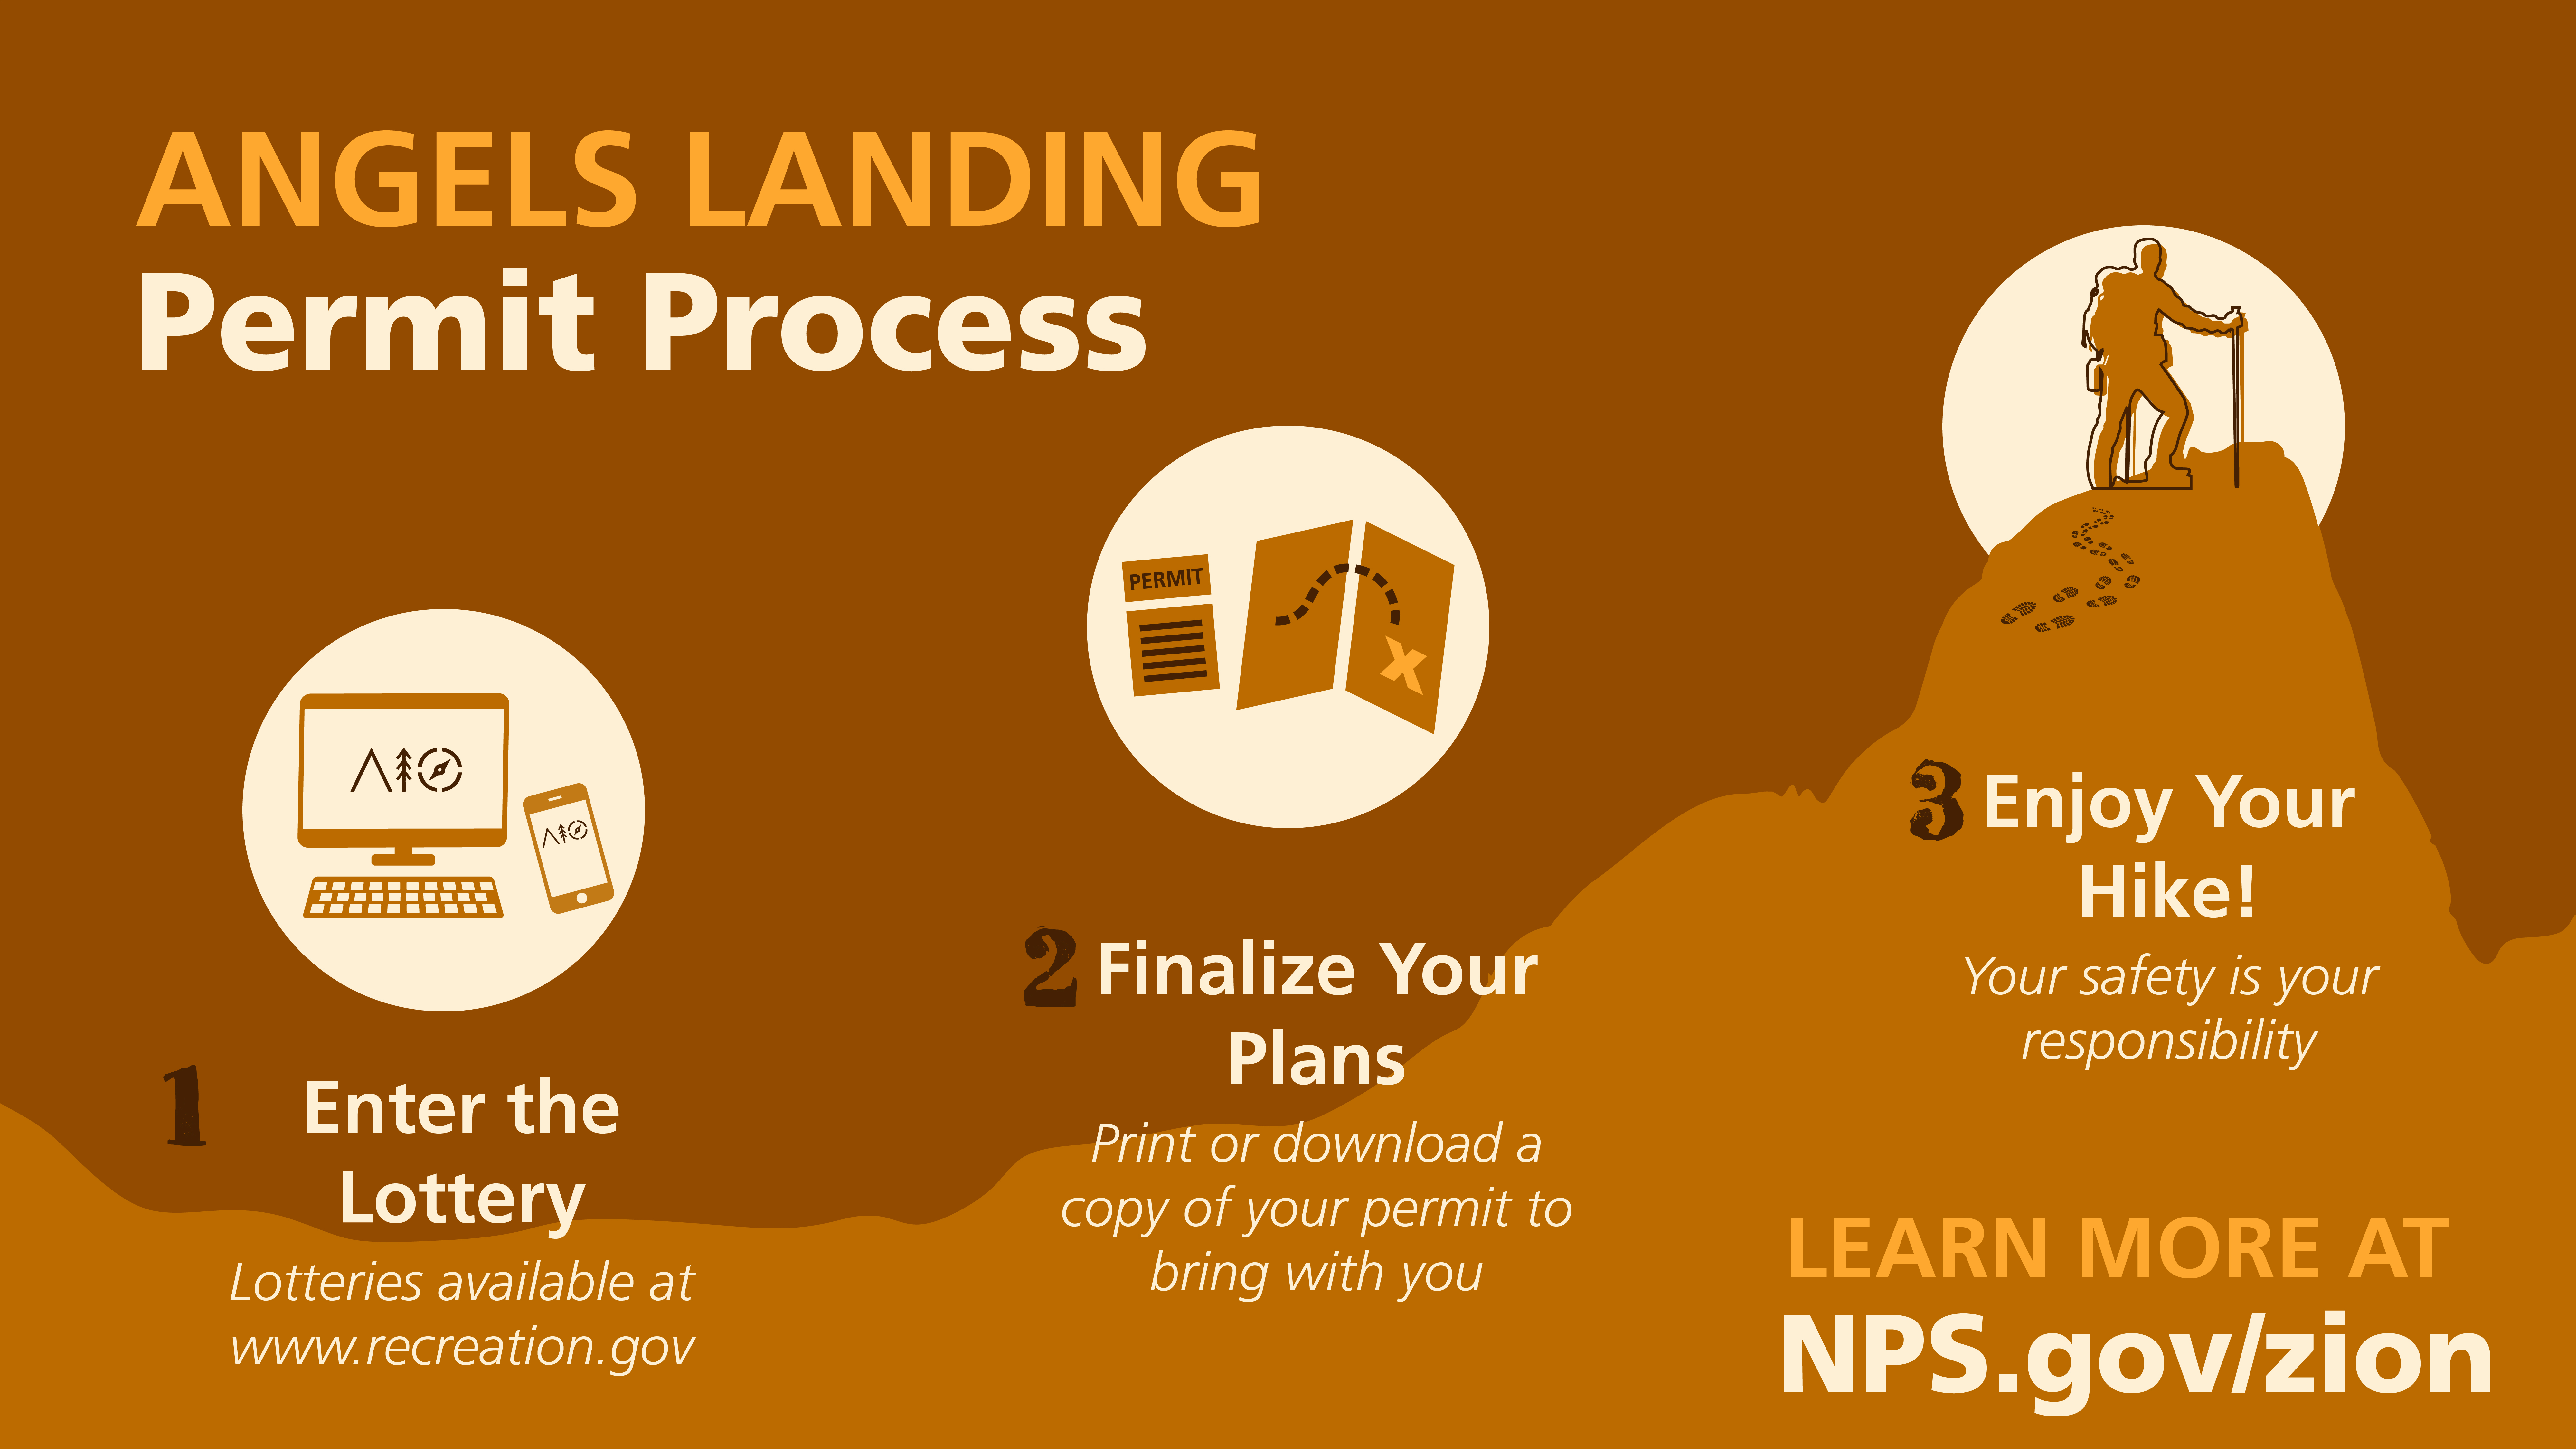 Graphic with three step process to Enter lottery, Finalize Plans, and Enjoy hikes at Angels Landing